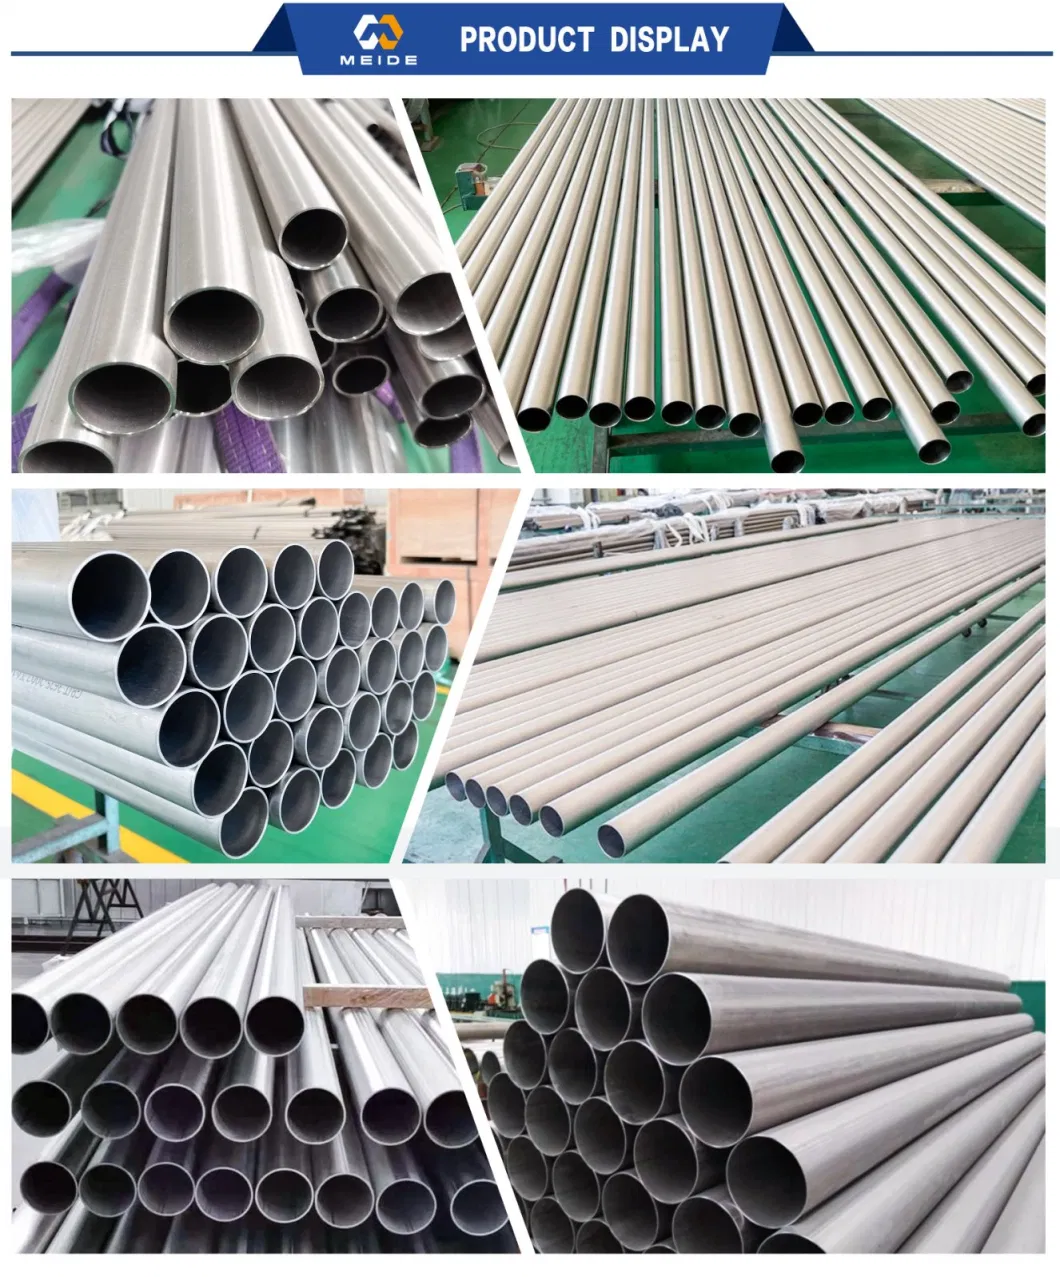 Titanium Tube Price Gr1 Gr2 Gr3 Gr4 Gr5 Titanium Pipe Is Used for Automobile and Motorcycle Exhaust